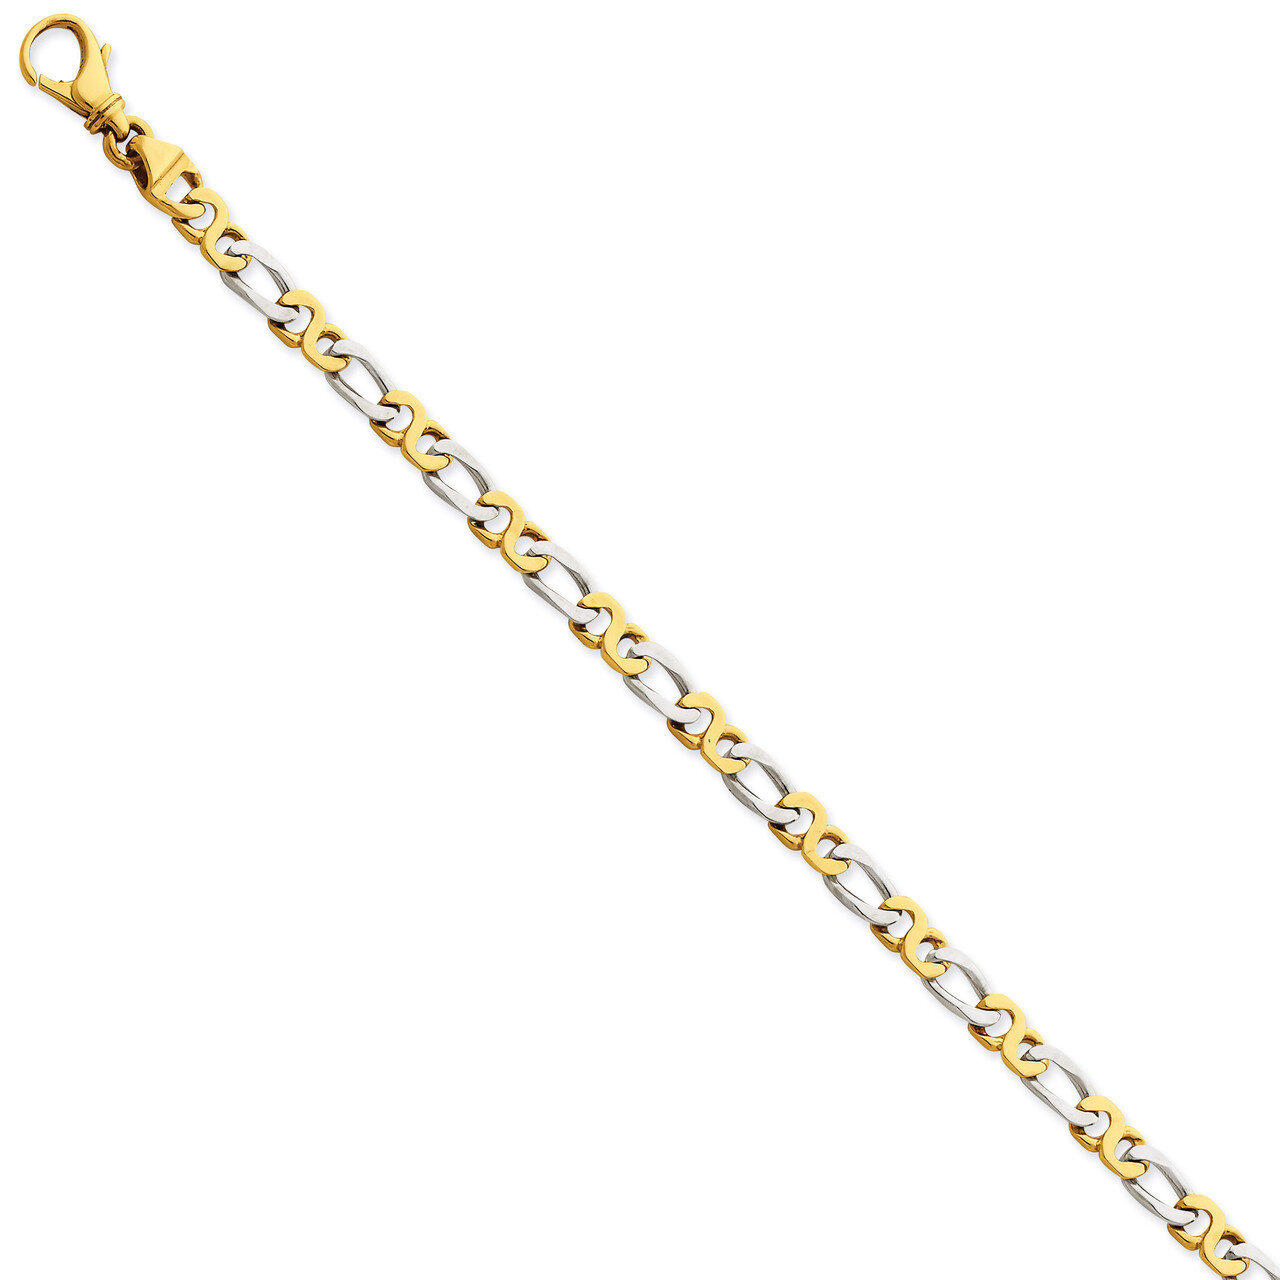 4.8mm Polished Fancy Link Chain 22 Inch 14k Two-Tone Gold LK535-22